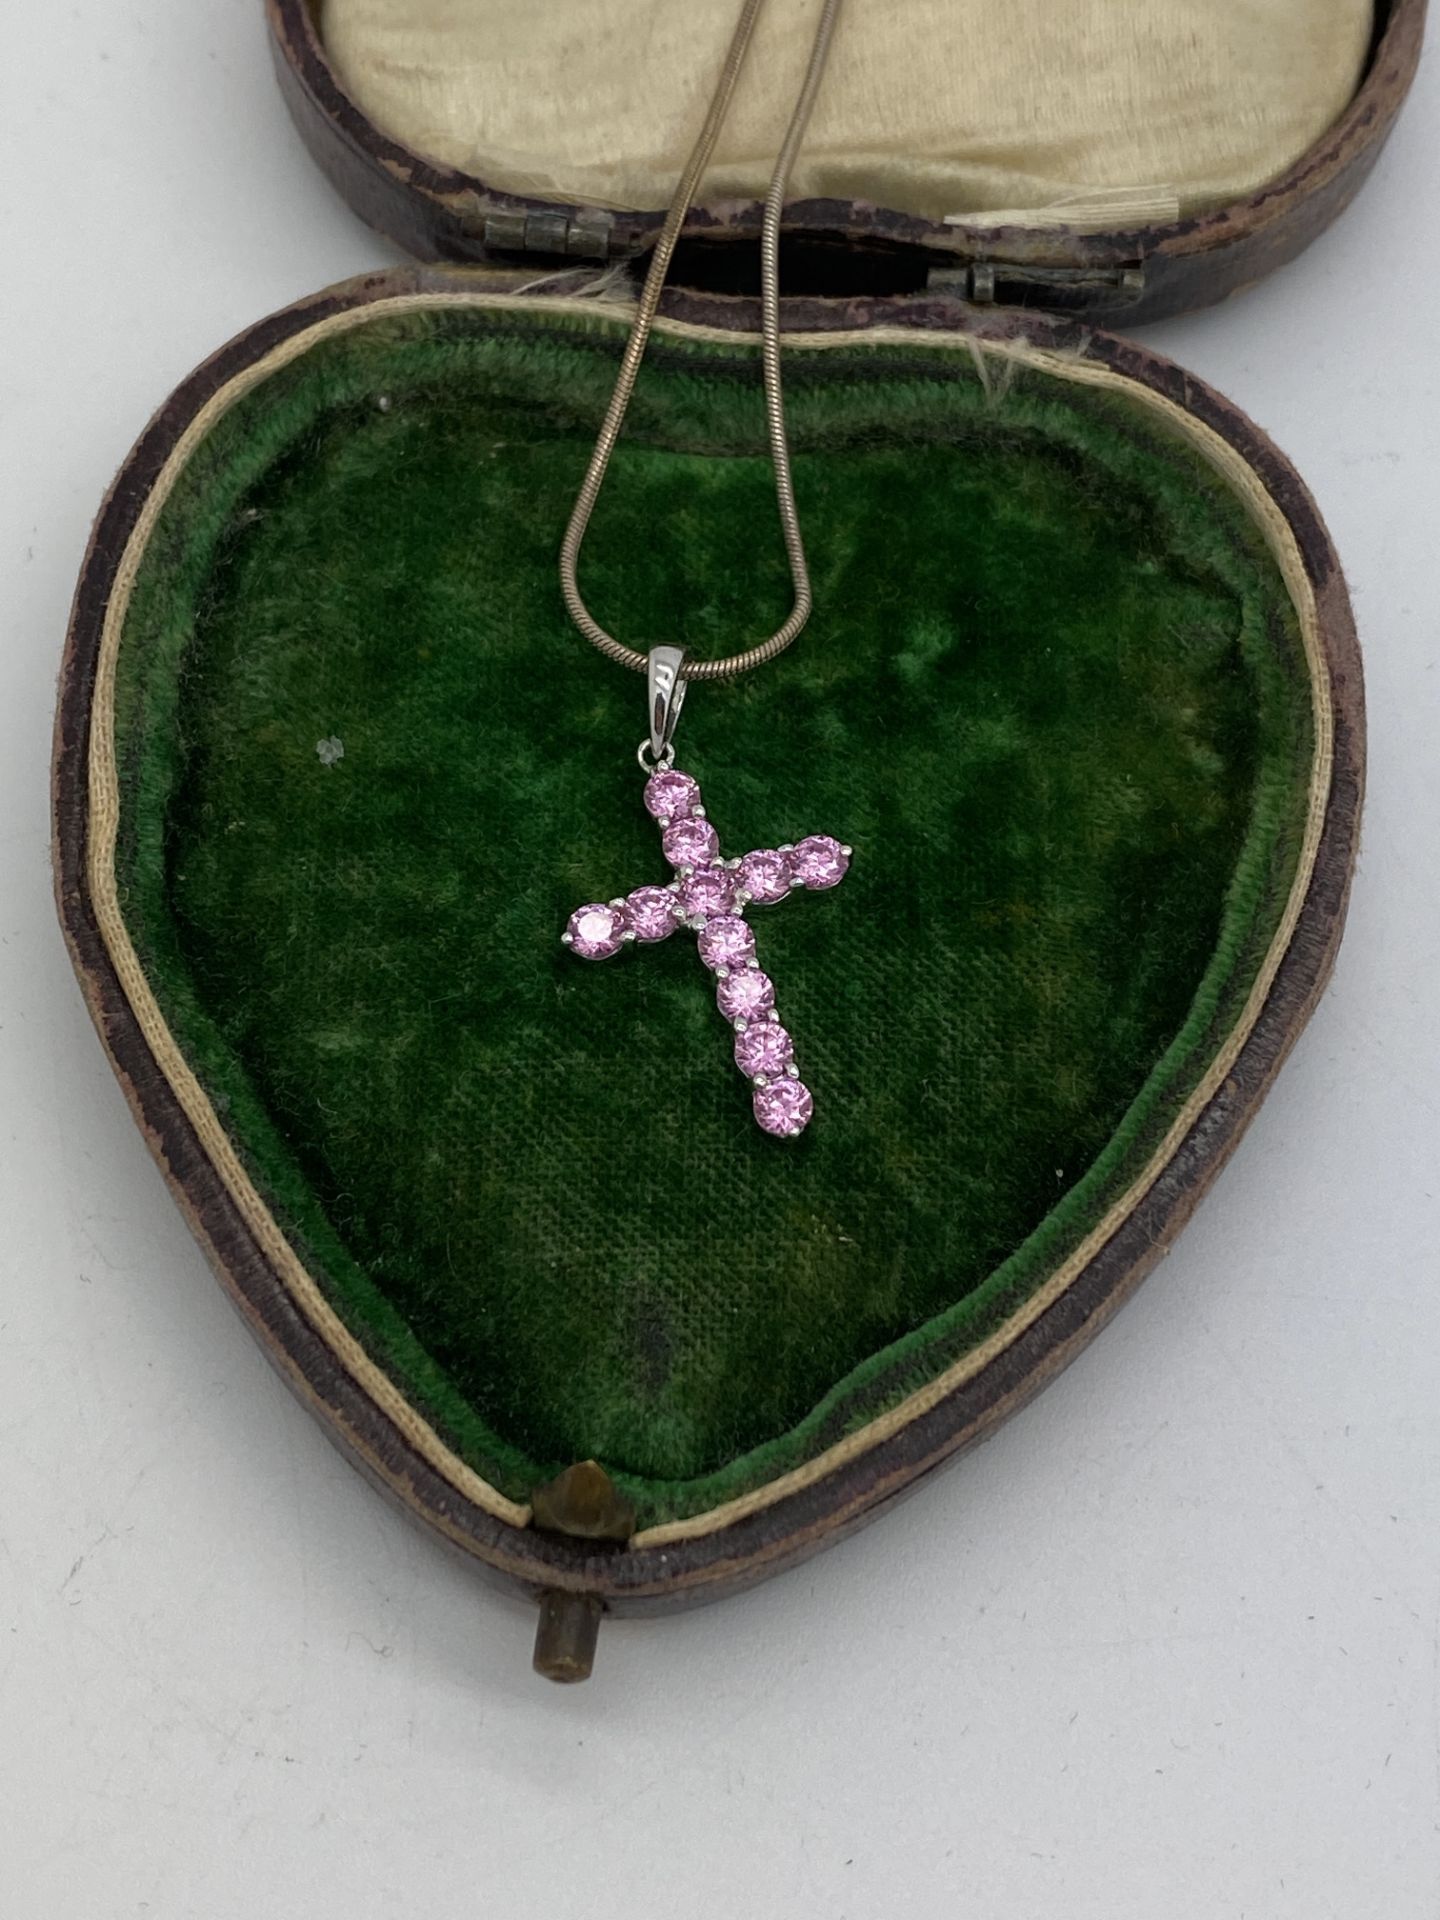 14ct WHITE GOLD PINK SAPPHIRE CROSS PENDANT WITH 925 CHAIN - Image 2 of 3